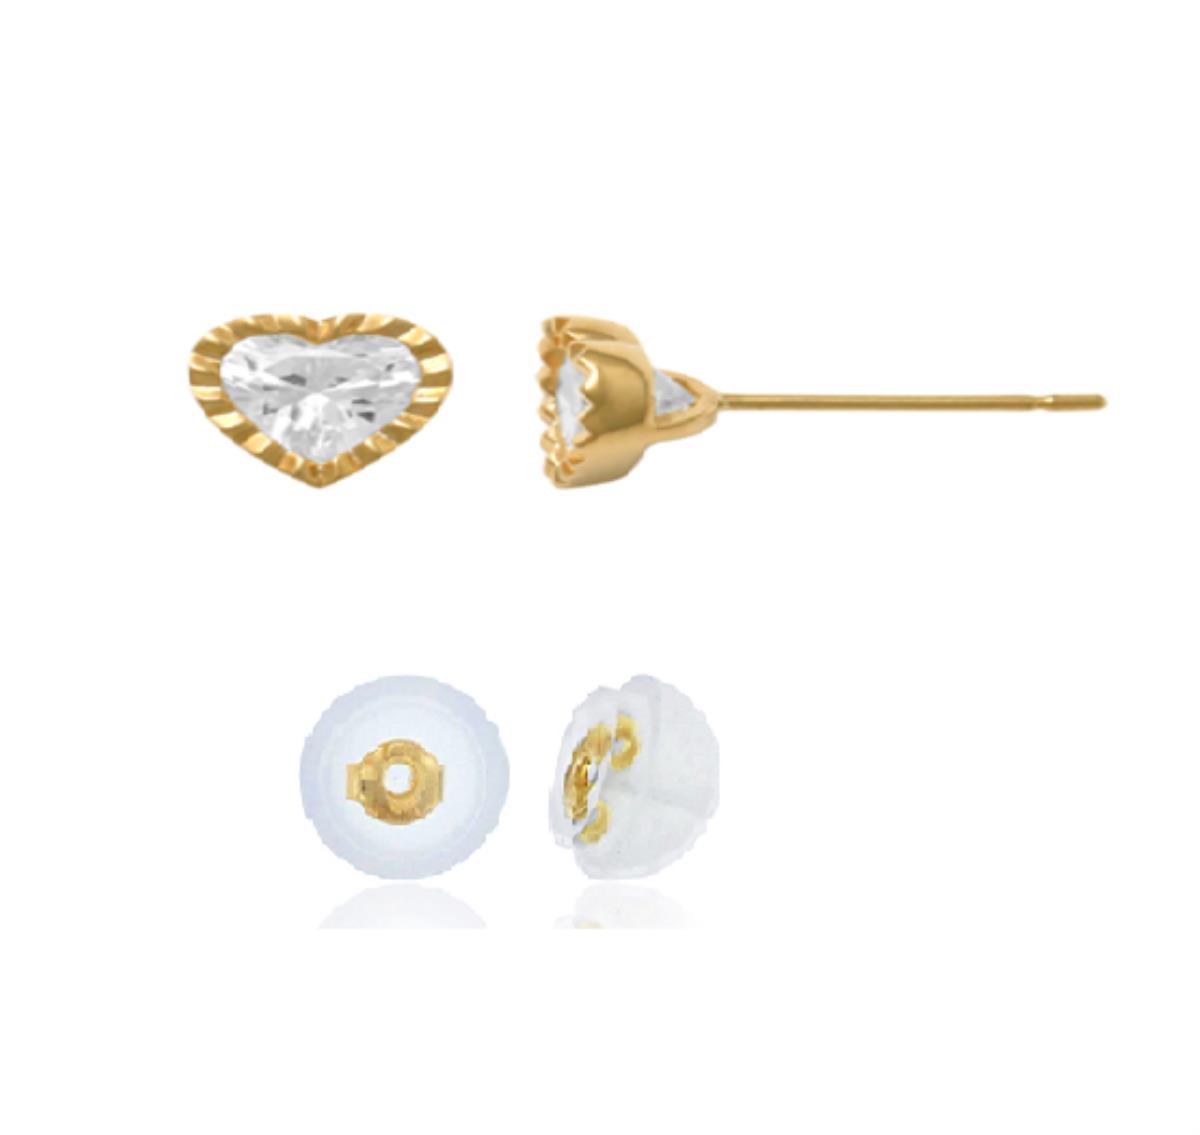 10K Yellow Gold 5mm Heart Cut DC Stud Earring with Silicone Back